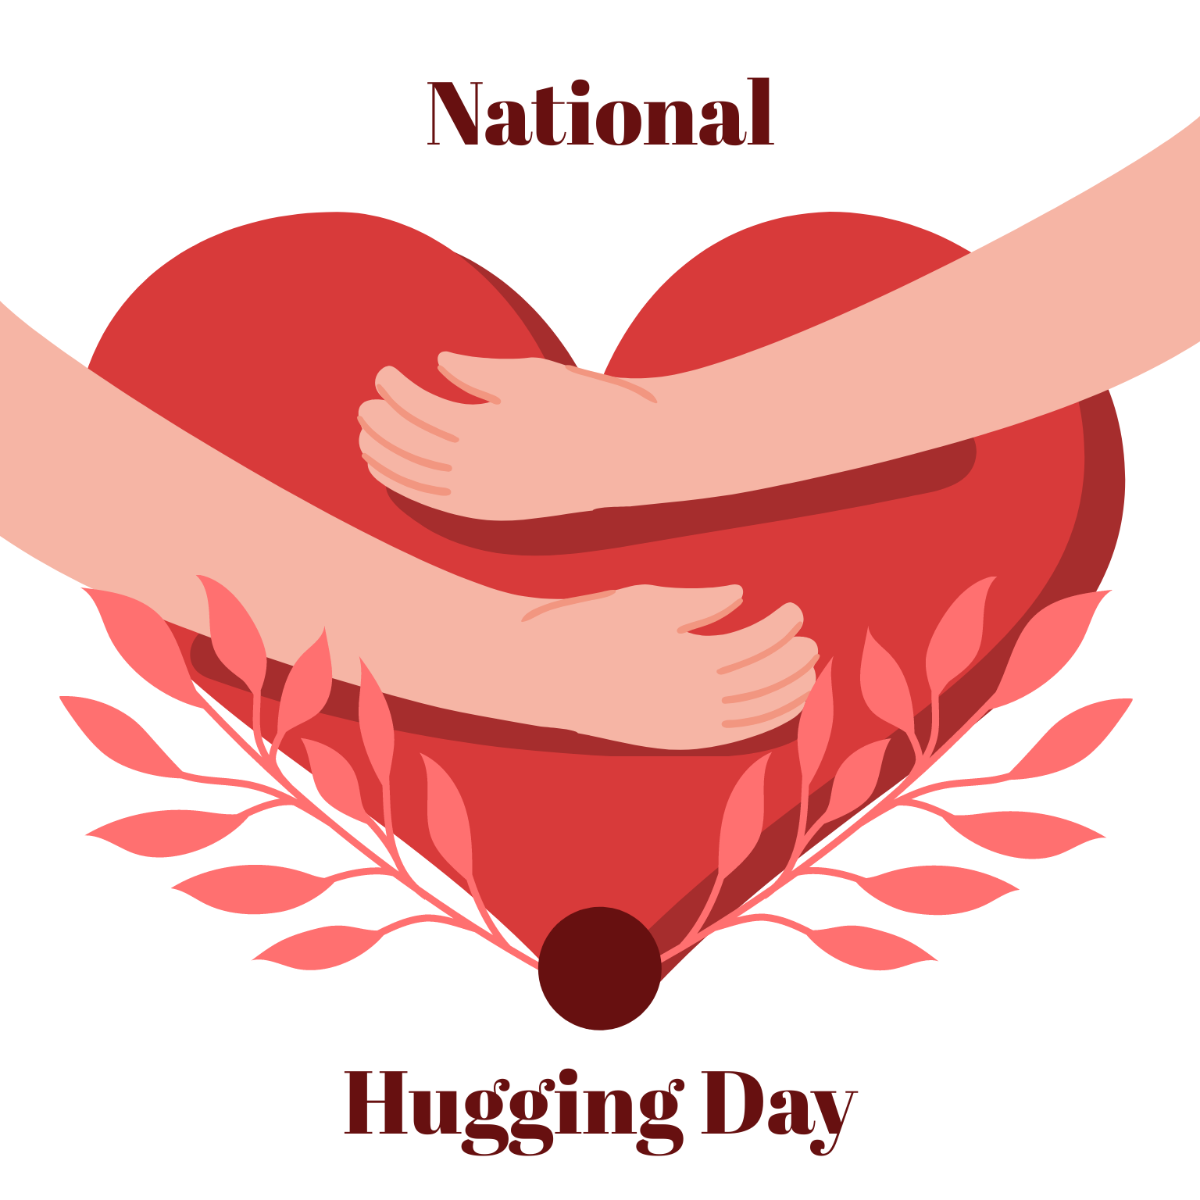 Free National Hugging Day Illustration Template